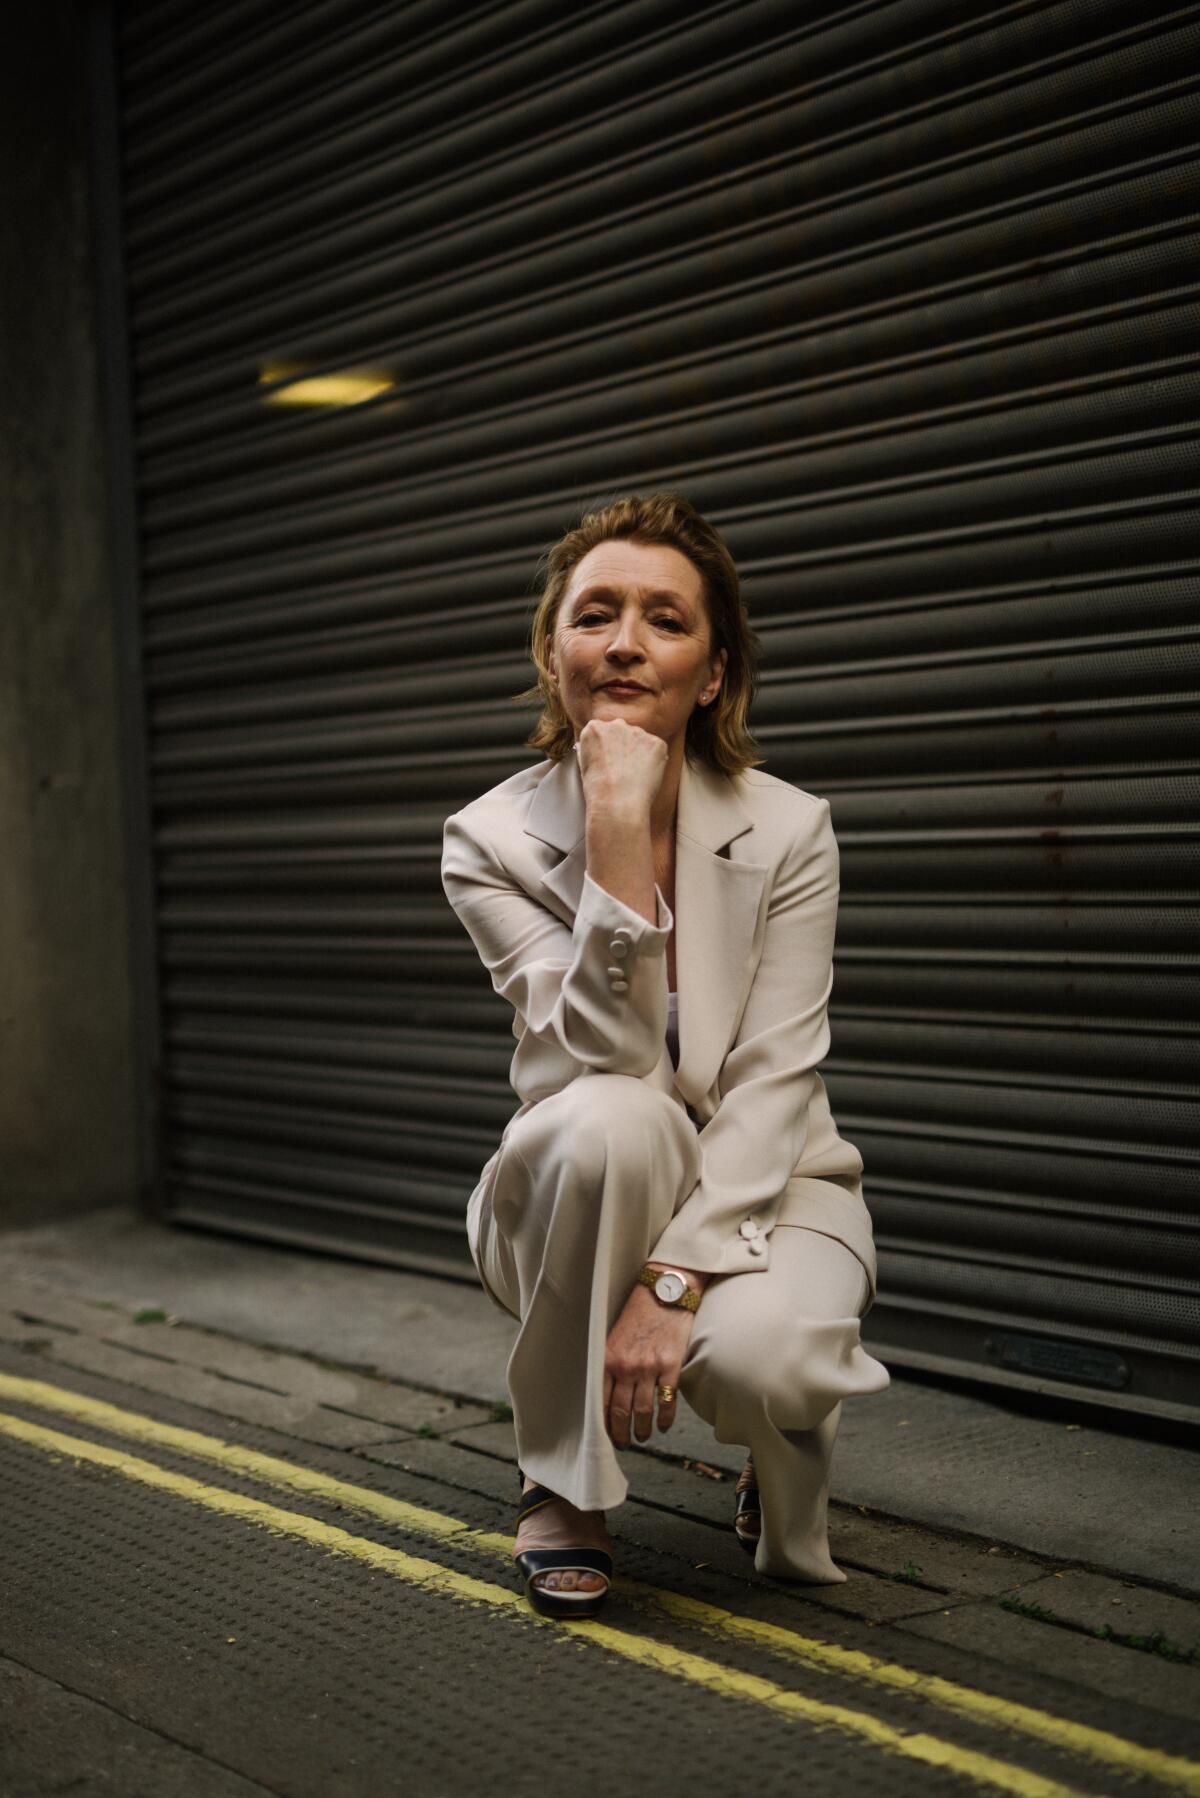 English actor Lesley Manville crouches down against an exterior wall, hand to her chin, for a portrait.